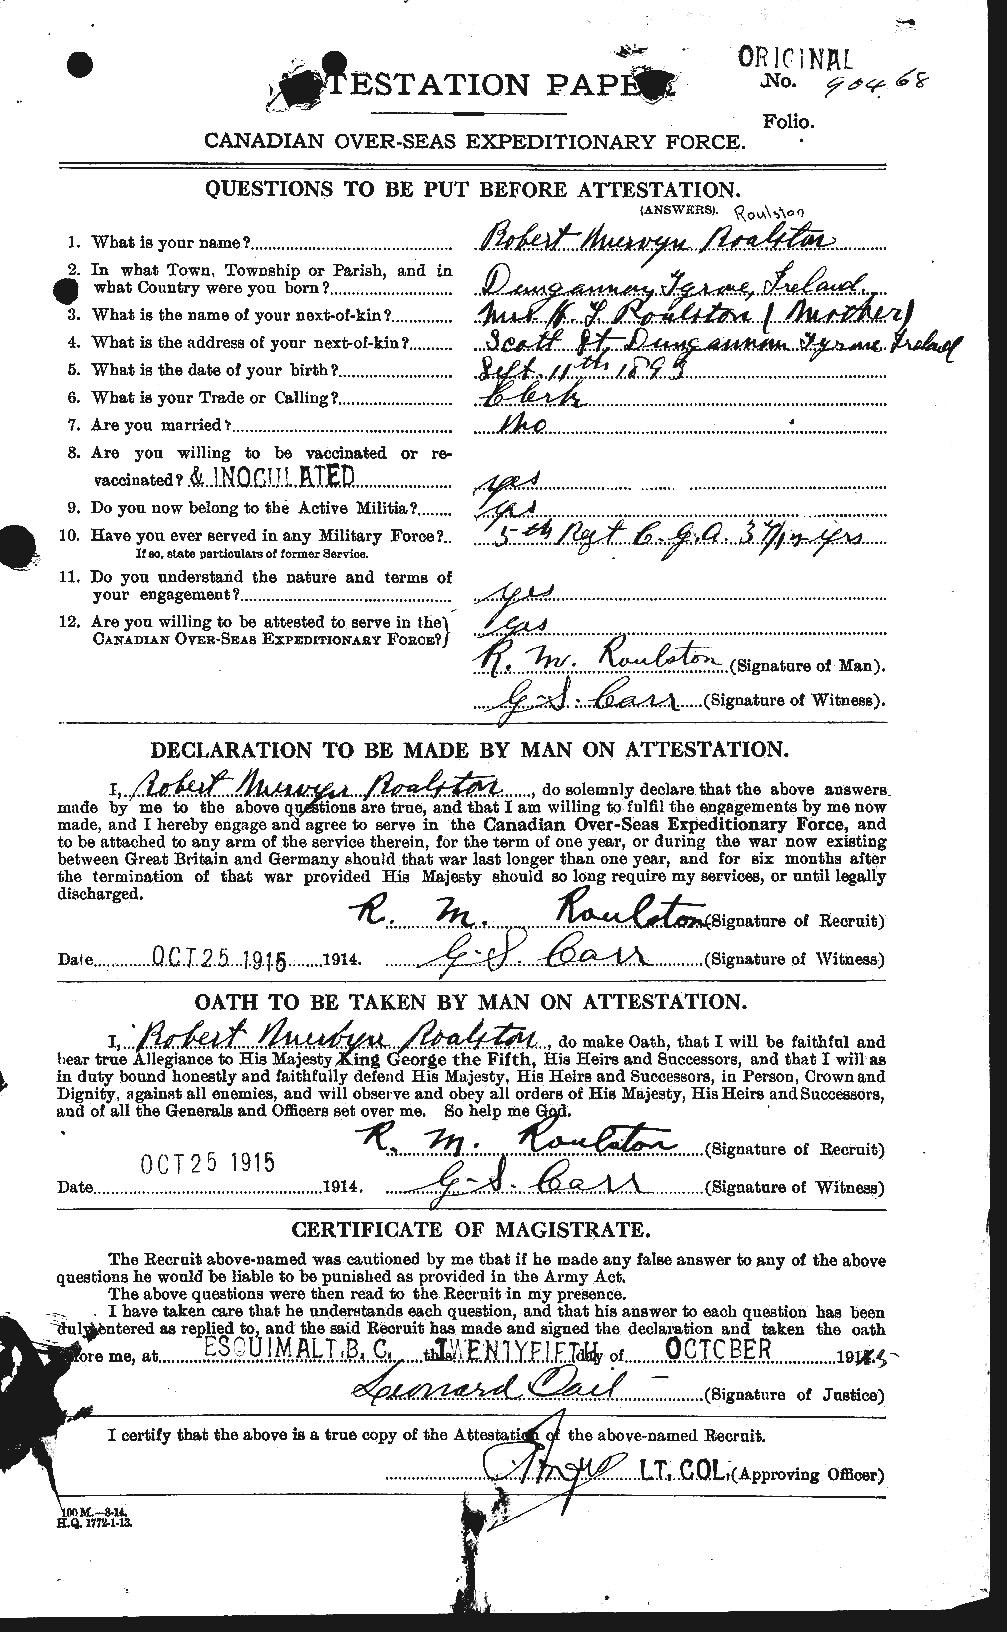 Personnel Records of the First World War - CEF 614640a